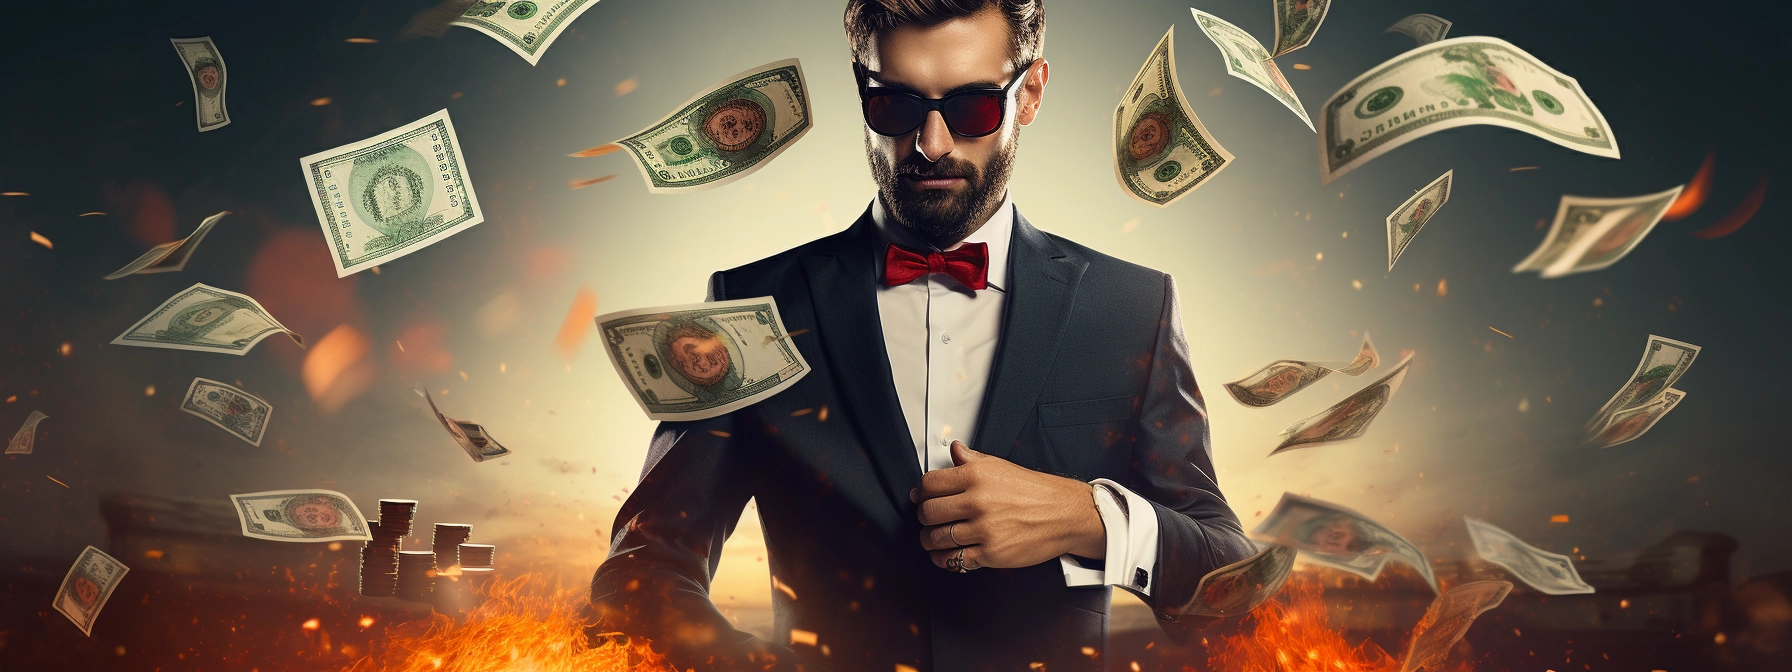 Image of a man with sunglasses standing in the middle of flying money at a real money casino